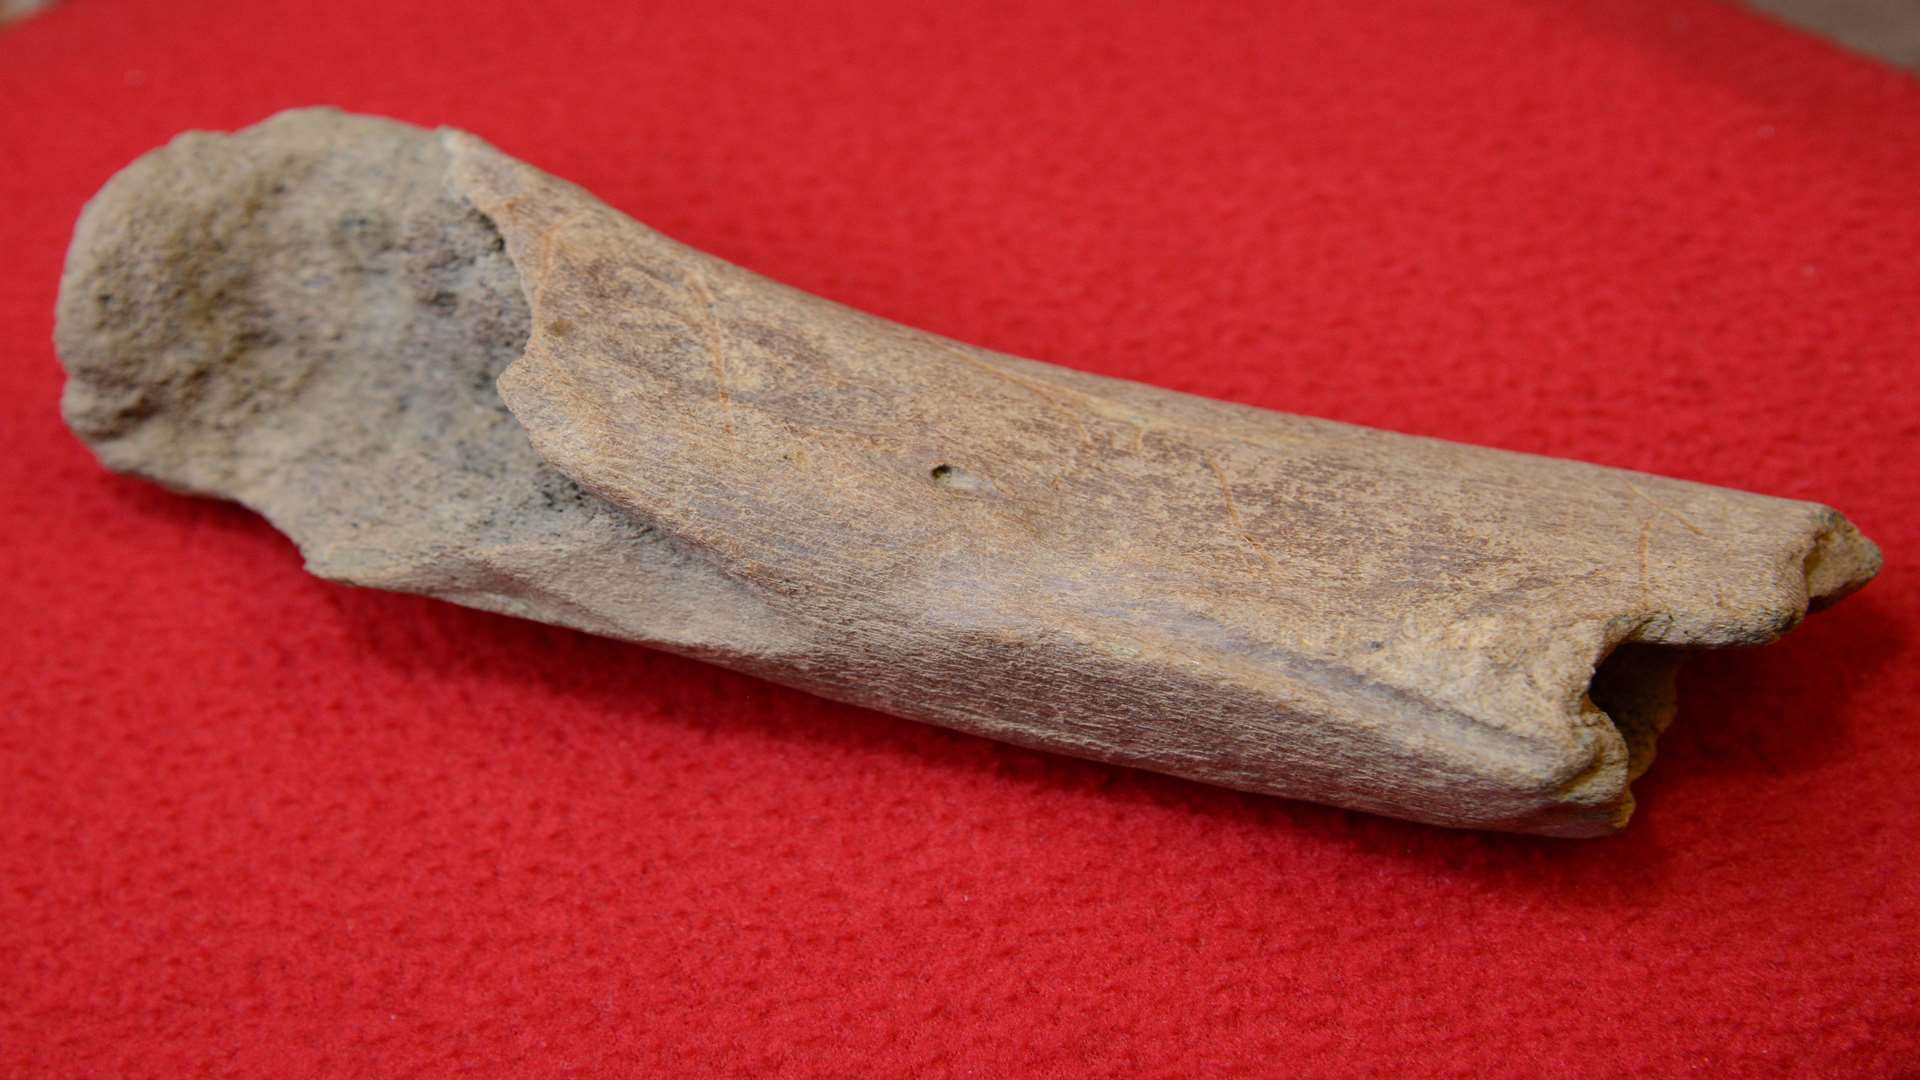 The fragment of bone found by Marion Boxall. Picture: Gary Browne